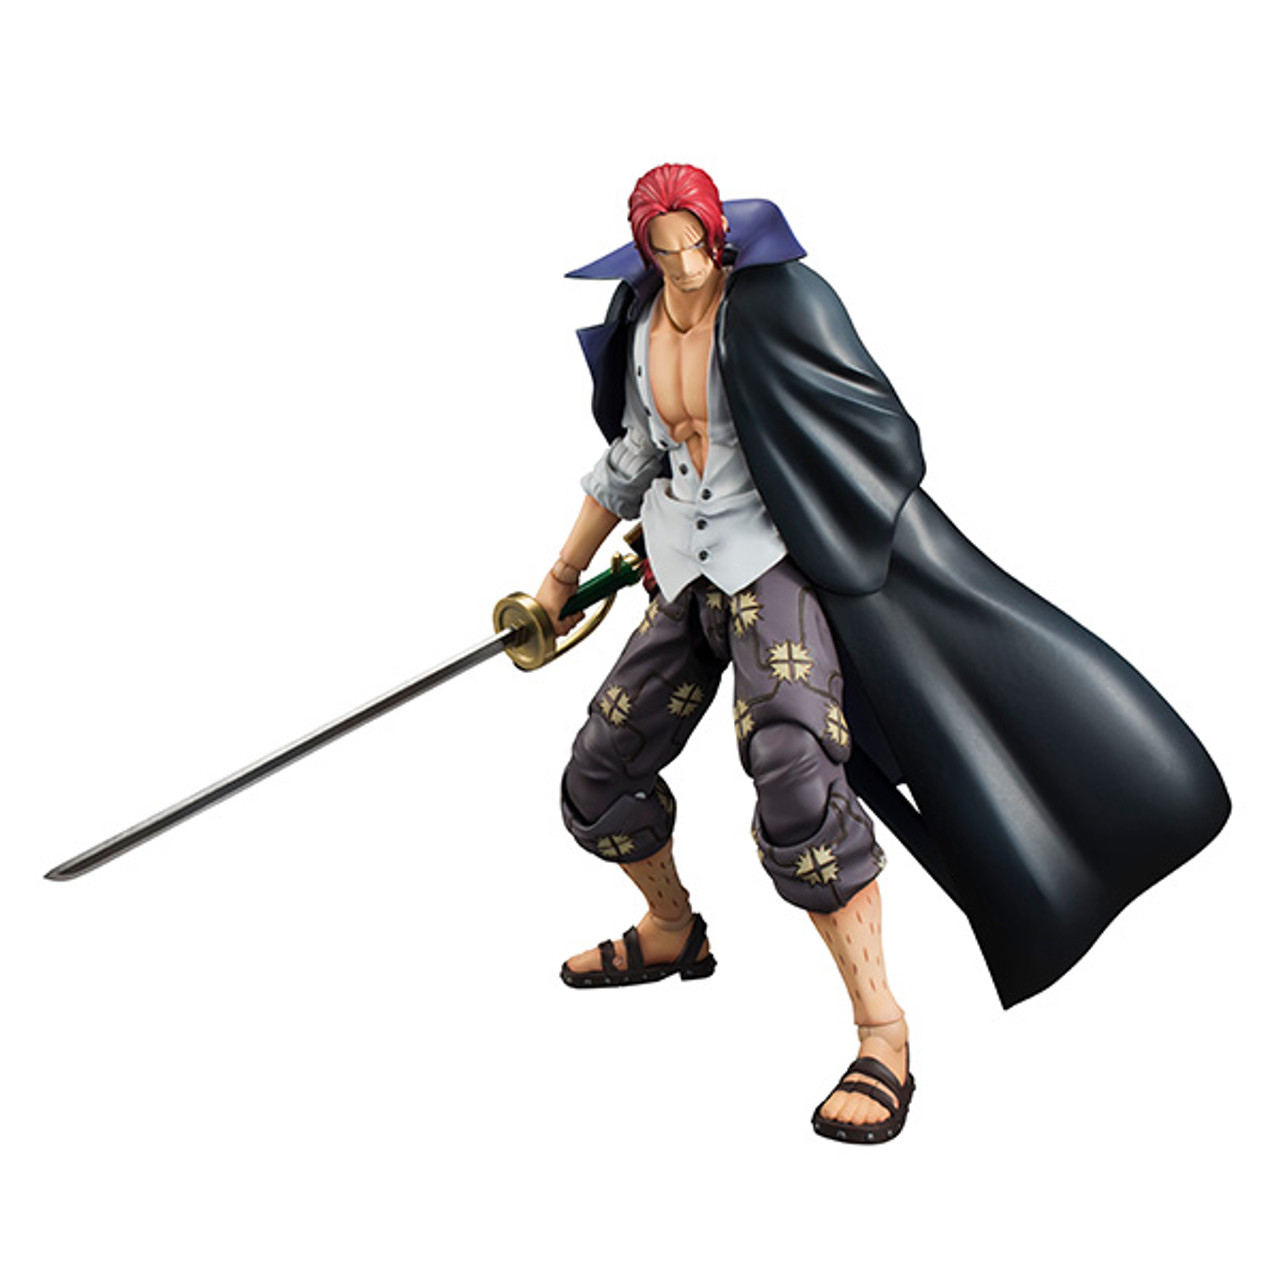 One Piece Figurine - Half Age Characters promise of the straw hat: Shanks  (Shanks / Red-Haired Shanks / Red Hair)